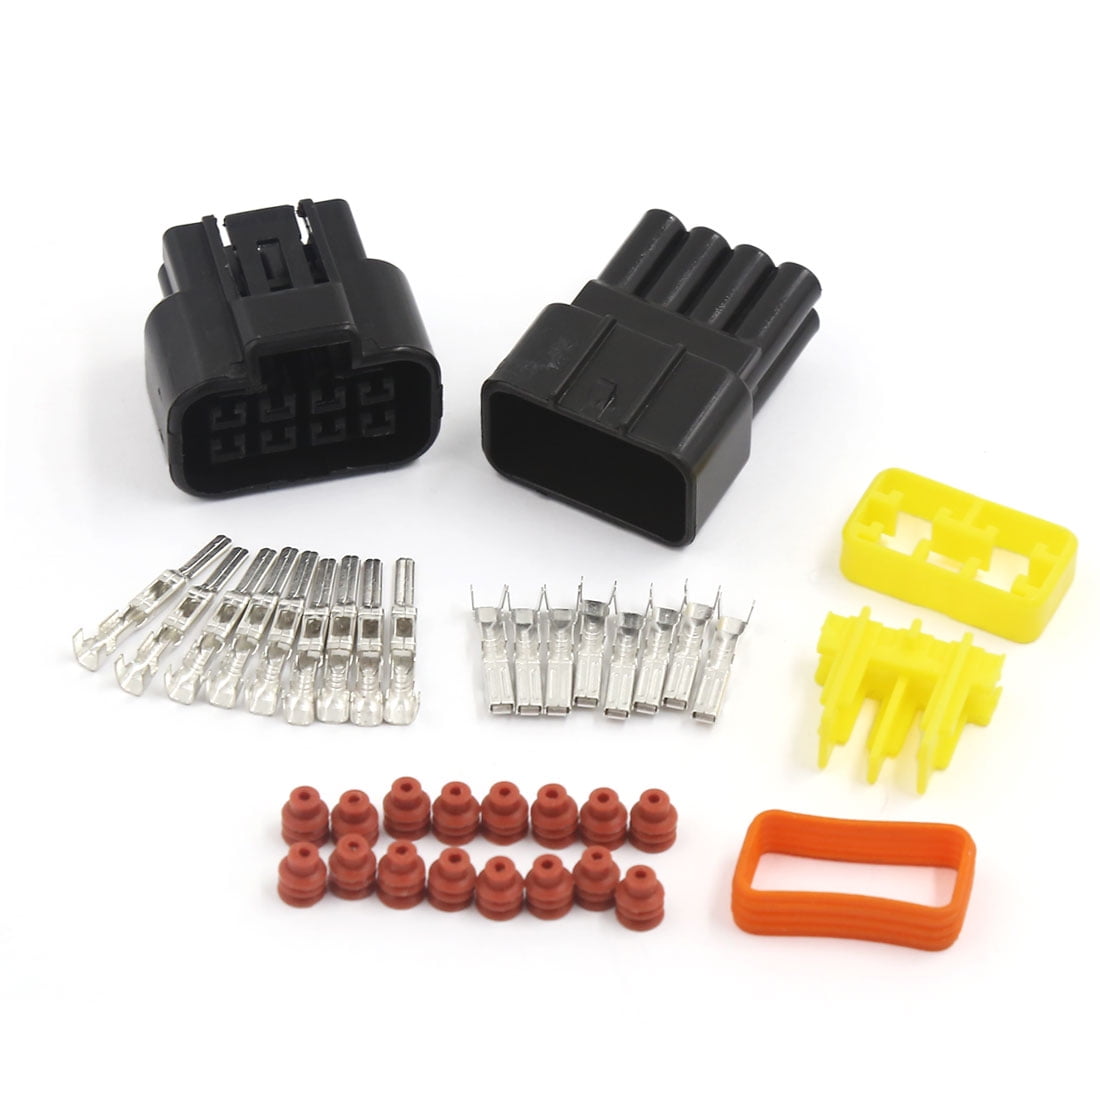 Wholesale Free Shipping 10 Pin Way 10 Sets Kits High Quality Amp Waterproof Electrical Connector Plugs For Automotive